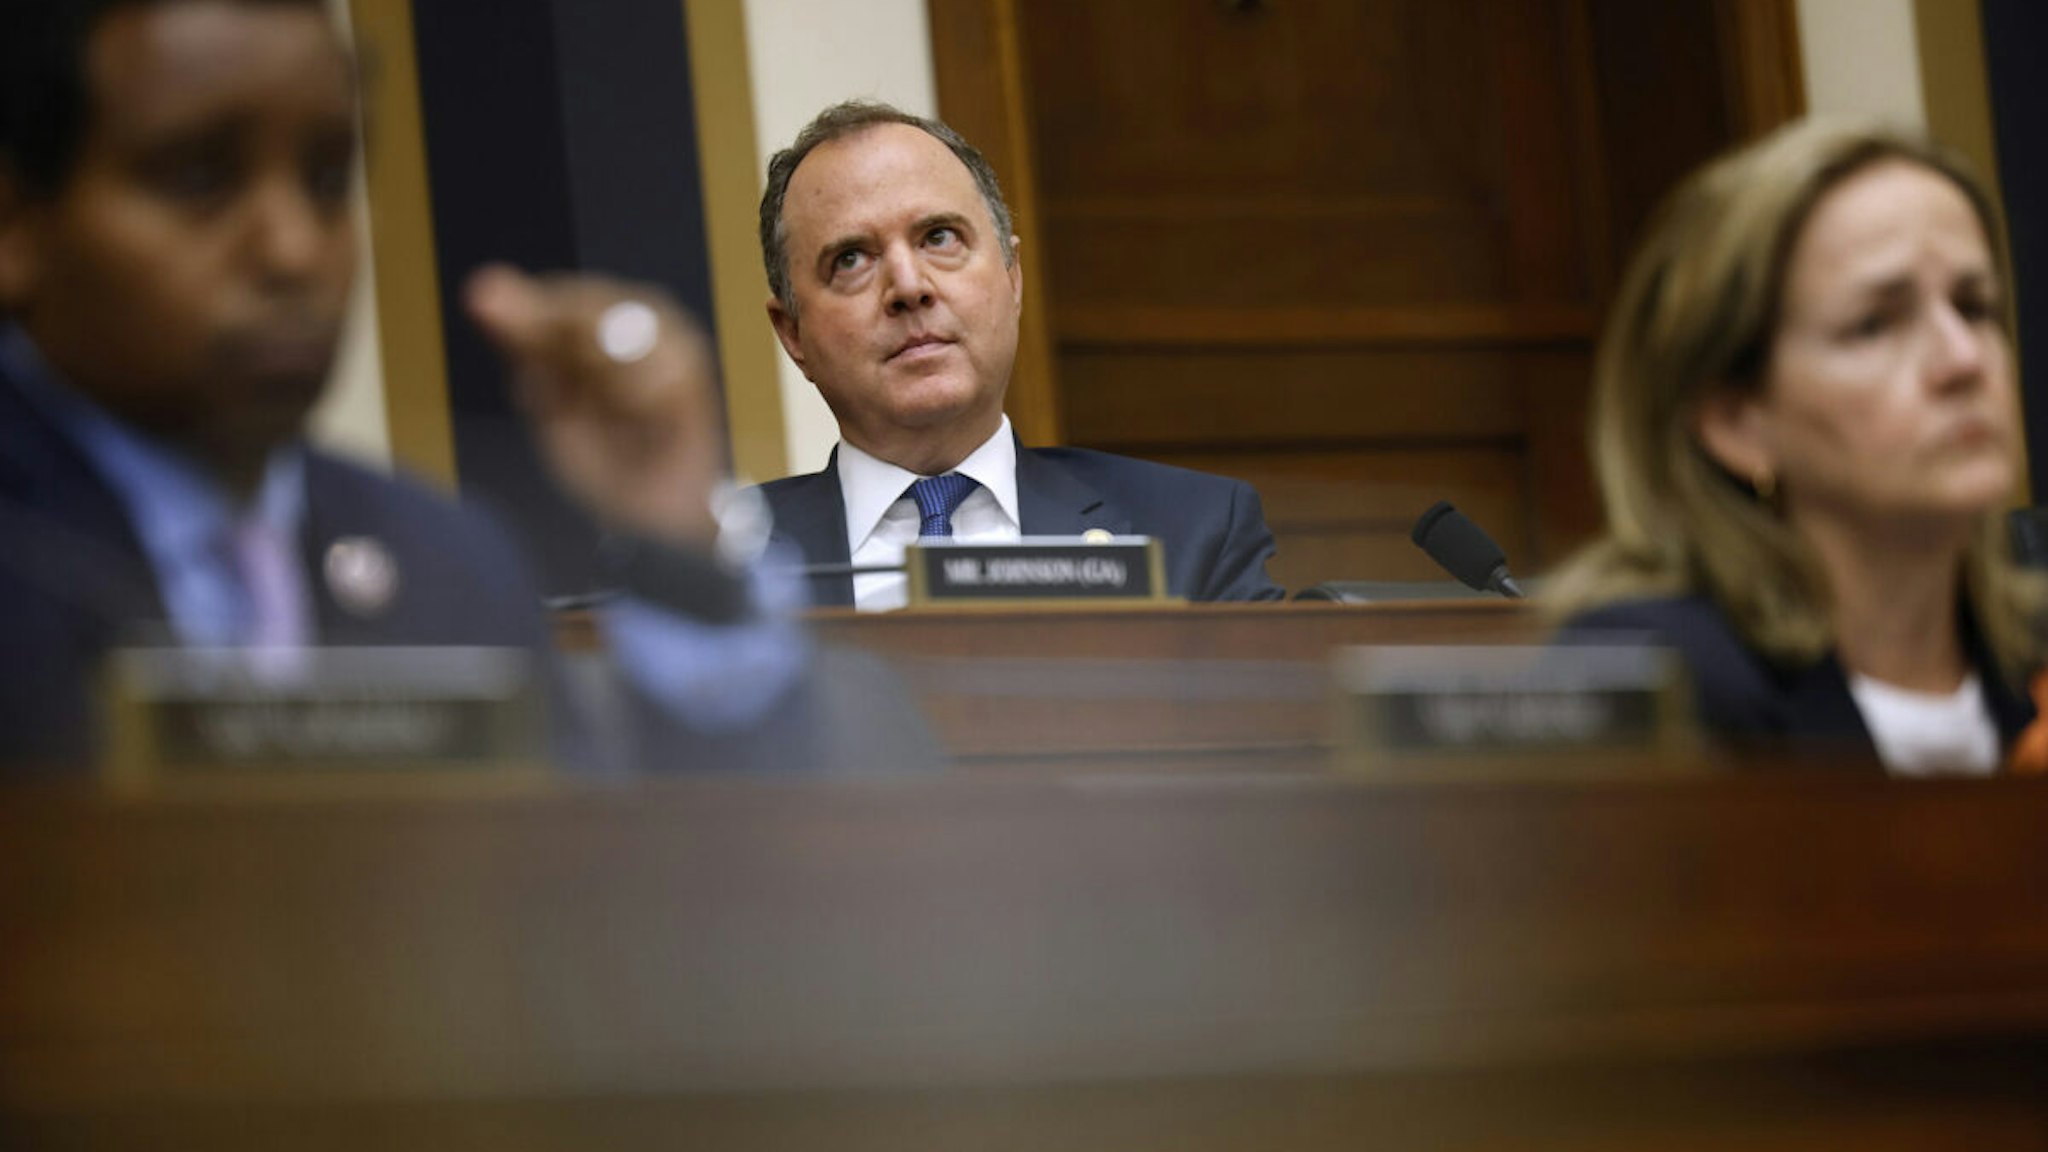 House Judiciary Committee member Rep. Adam Schiff (D-CA) listens to testimony from Special Counsel John Durham in the Rayburn House Office Building on Capitol Hill on June 21, 2023 in Washington, DC.